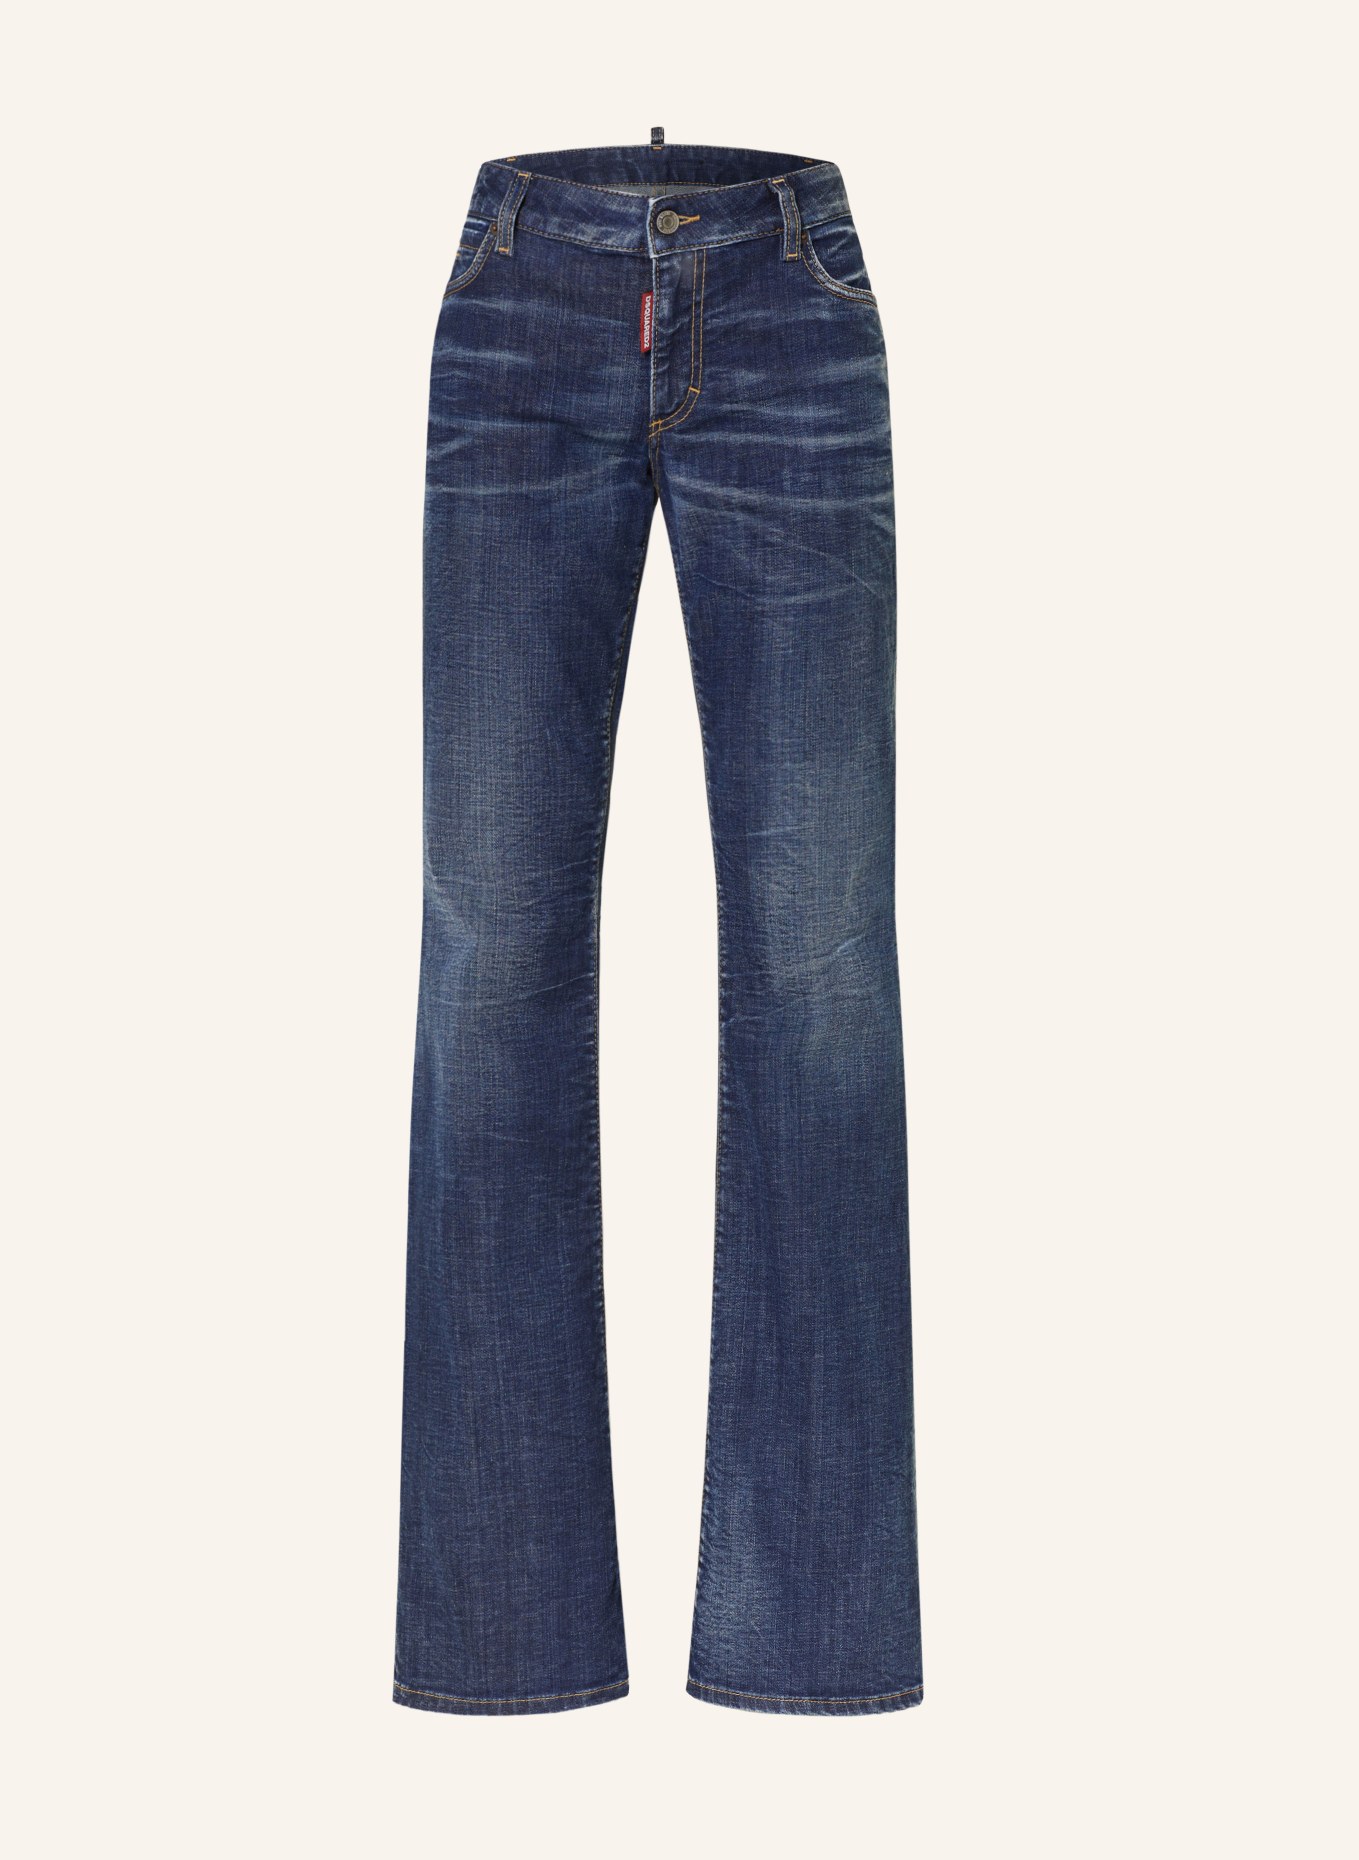 DSQUARED2 Flared Jeans, Farbe: 470 NAVY BLUE (Bild 1)